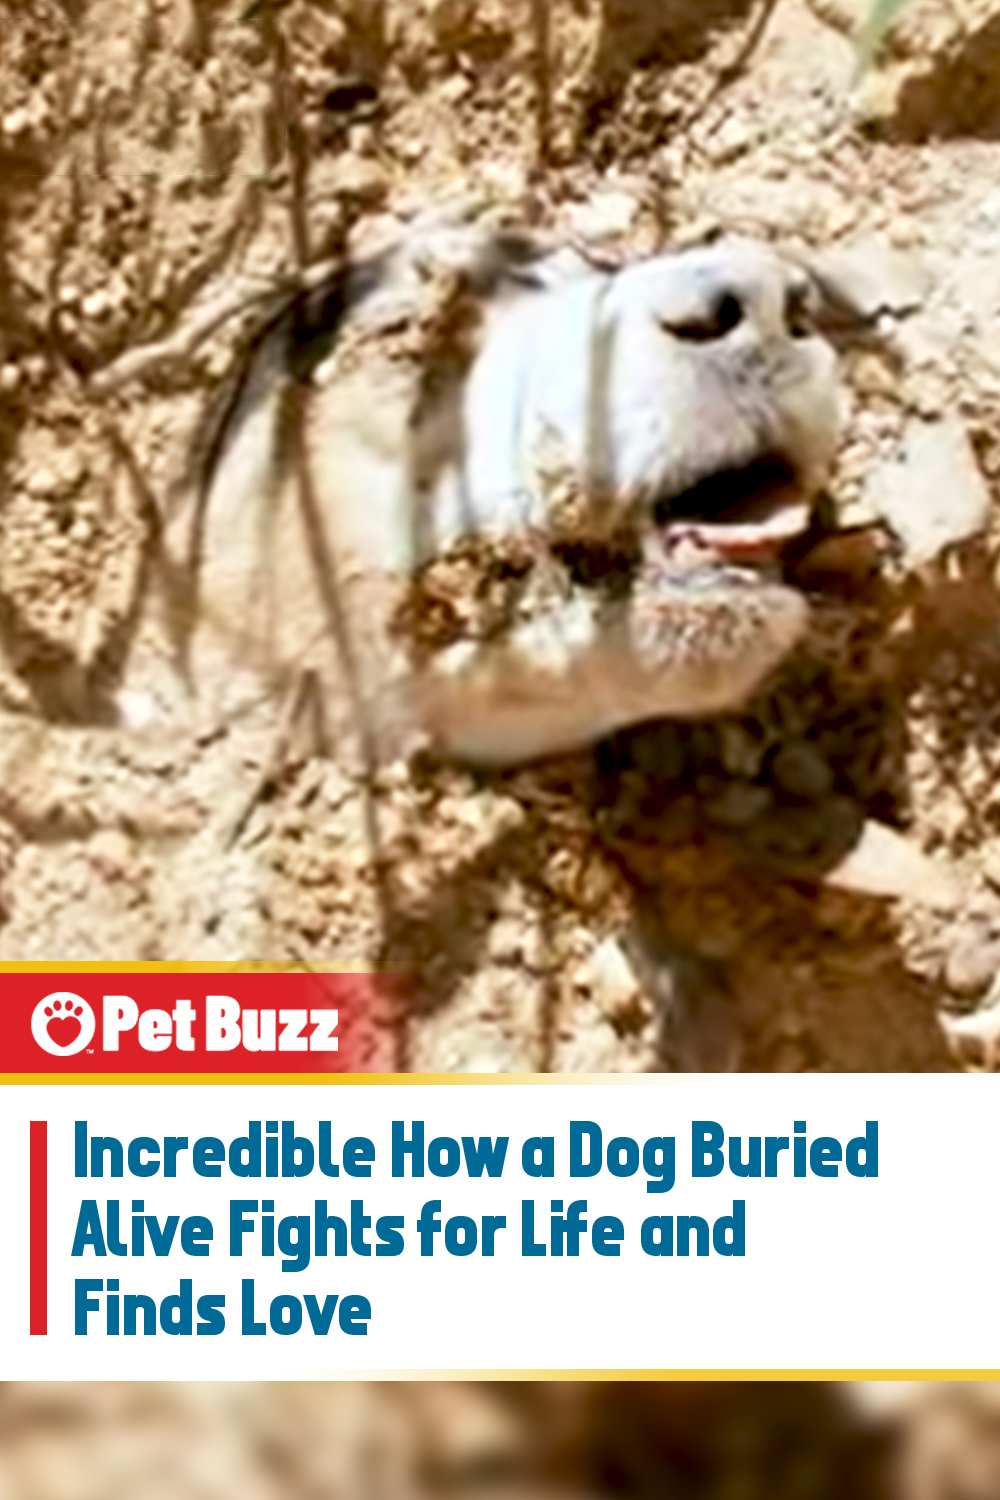 Incredible How a Dog Buried Alive Fights for Life and Finds Love